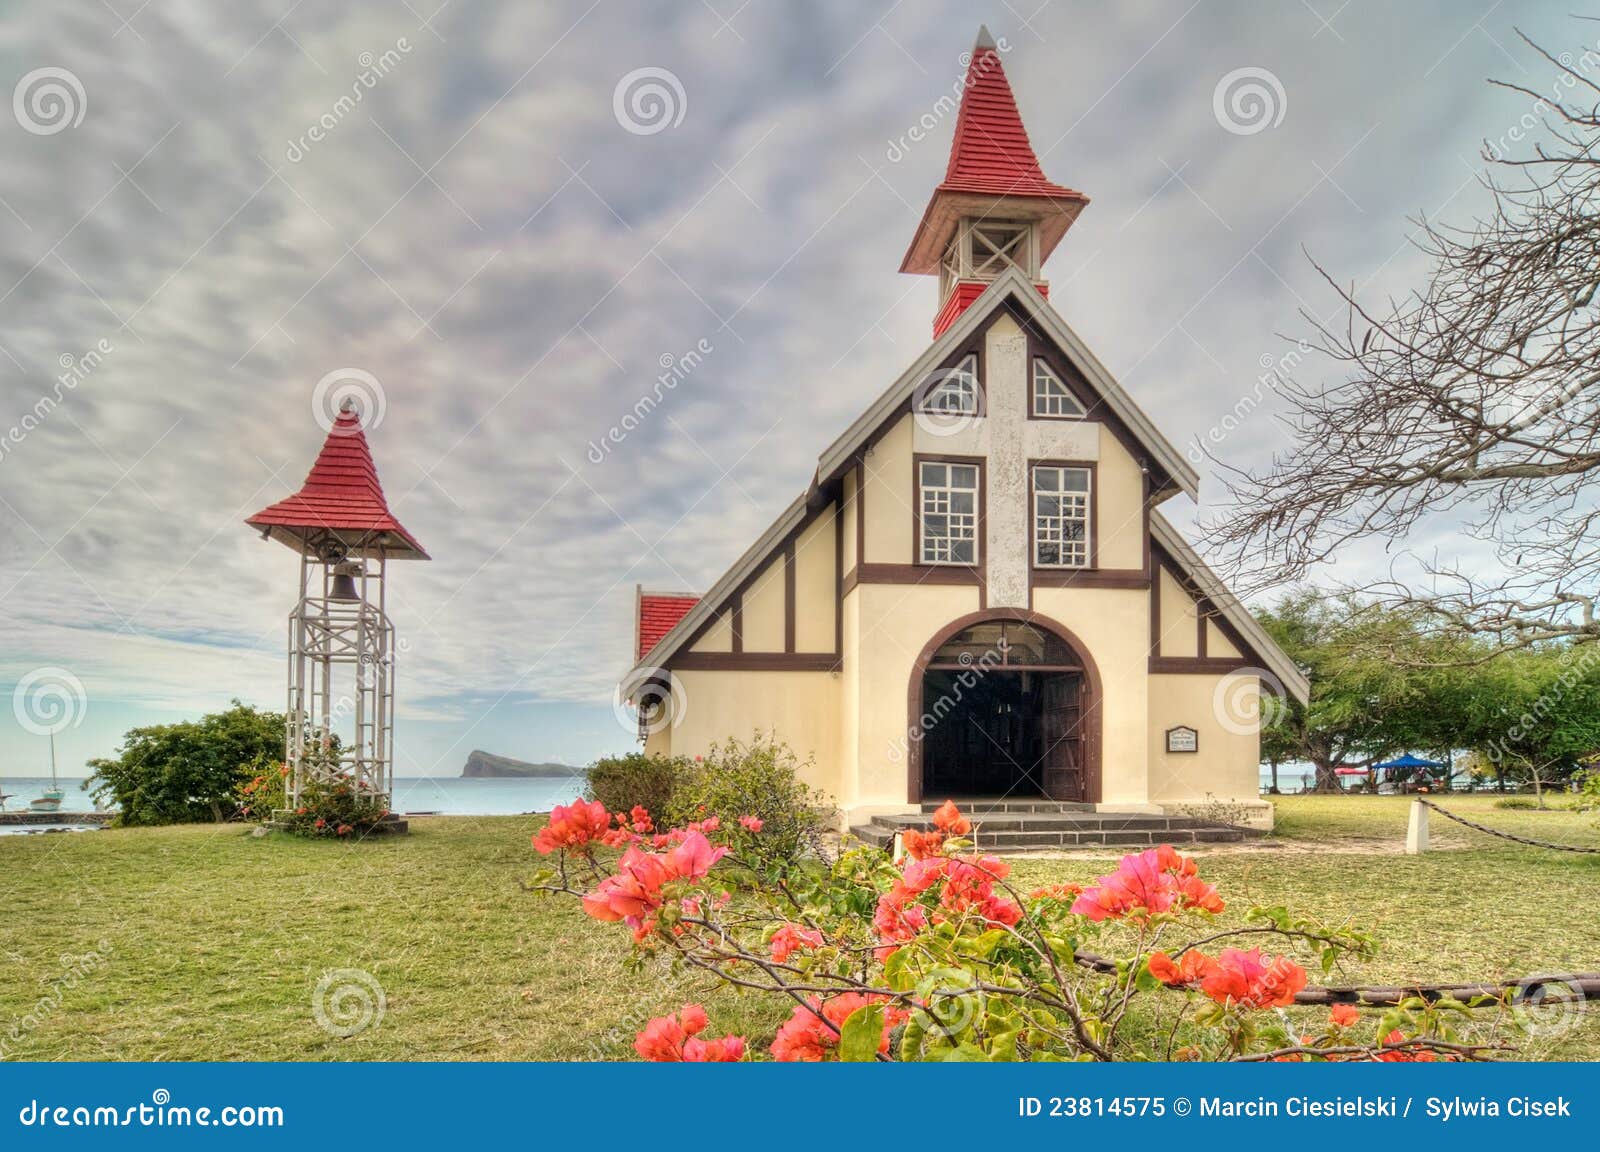 red roofed church